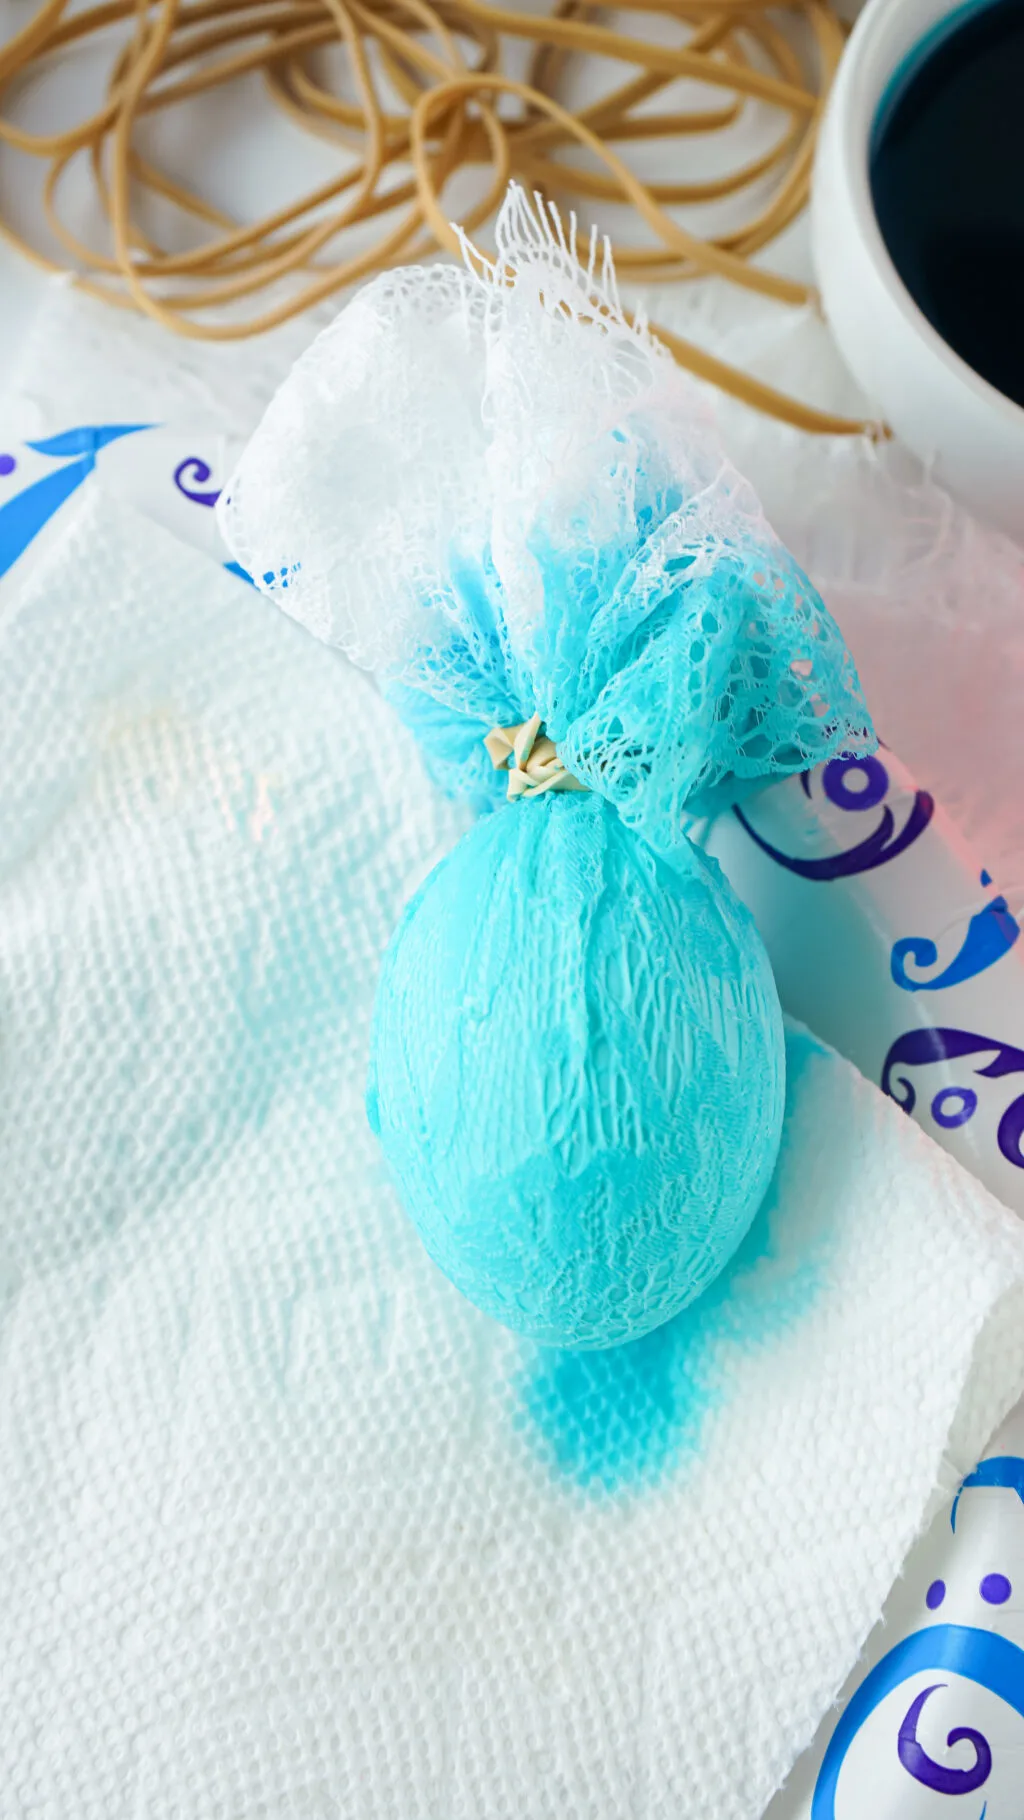 blue dyed fabric egg sitting on paper towels to dry